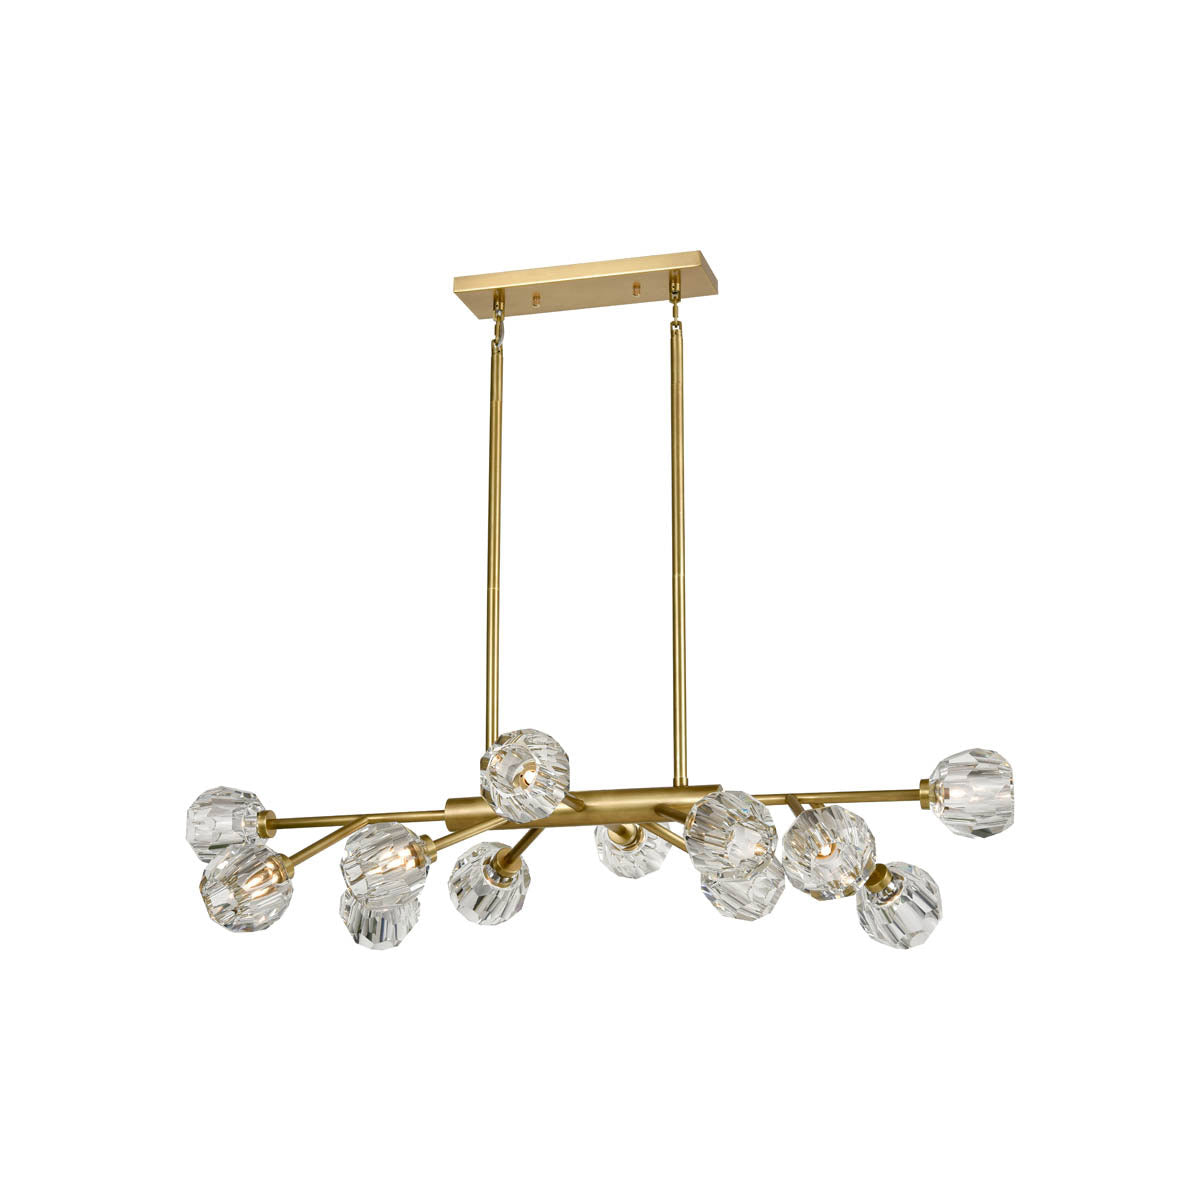 Steel Rod Arms with Clear Crystal Shade Linear Chandelier